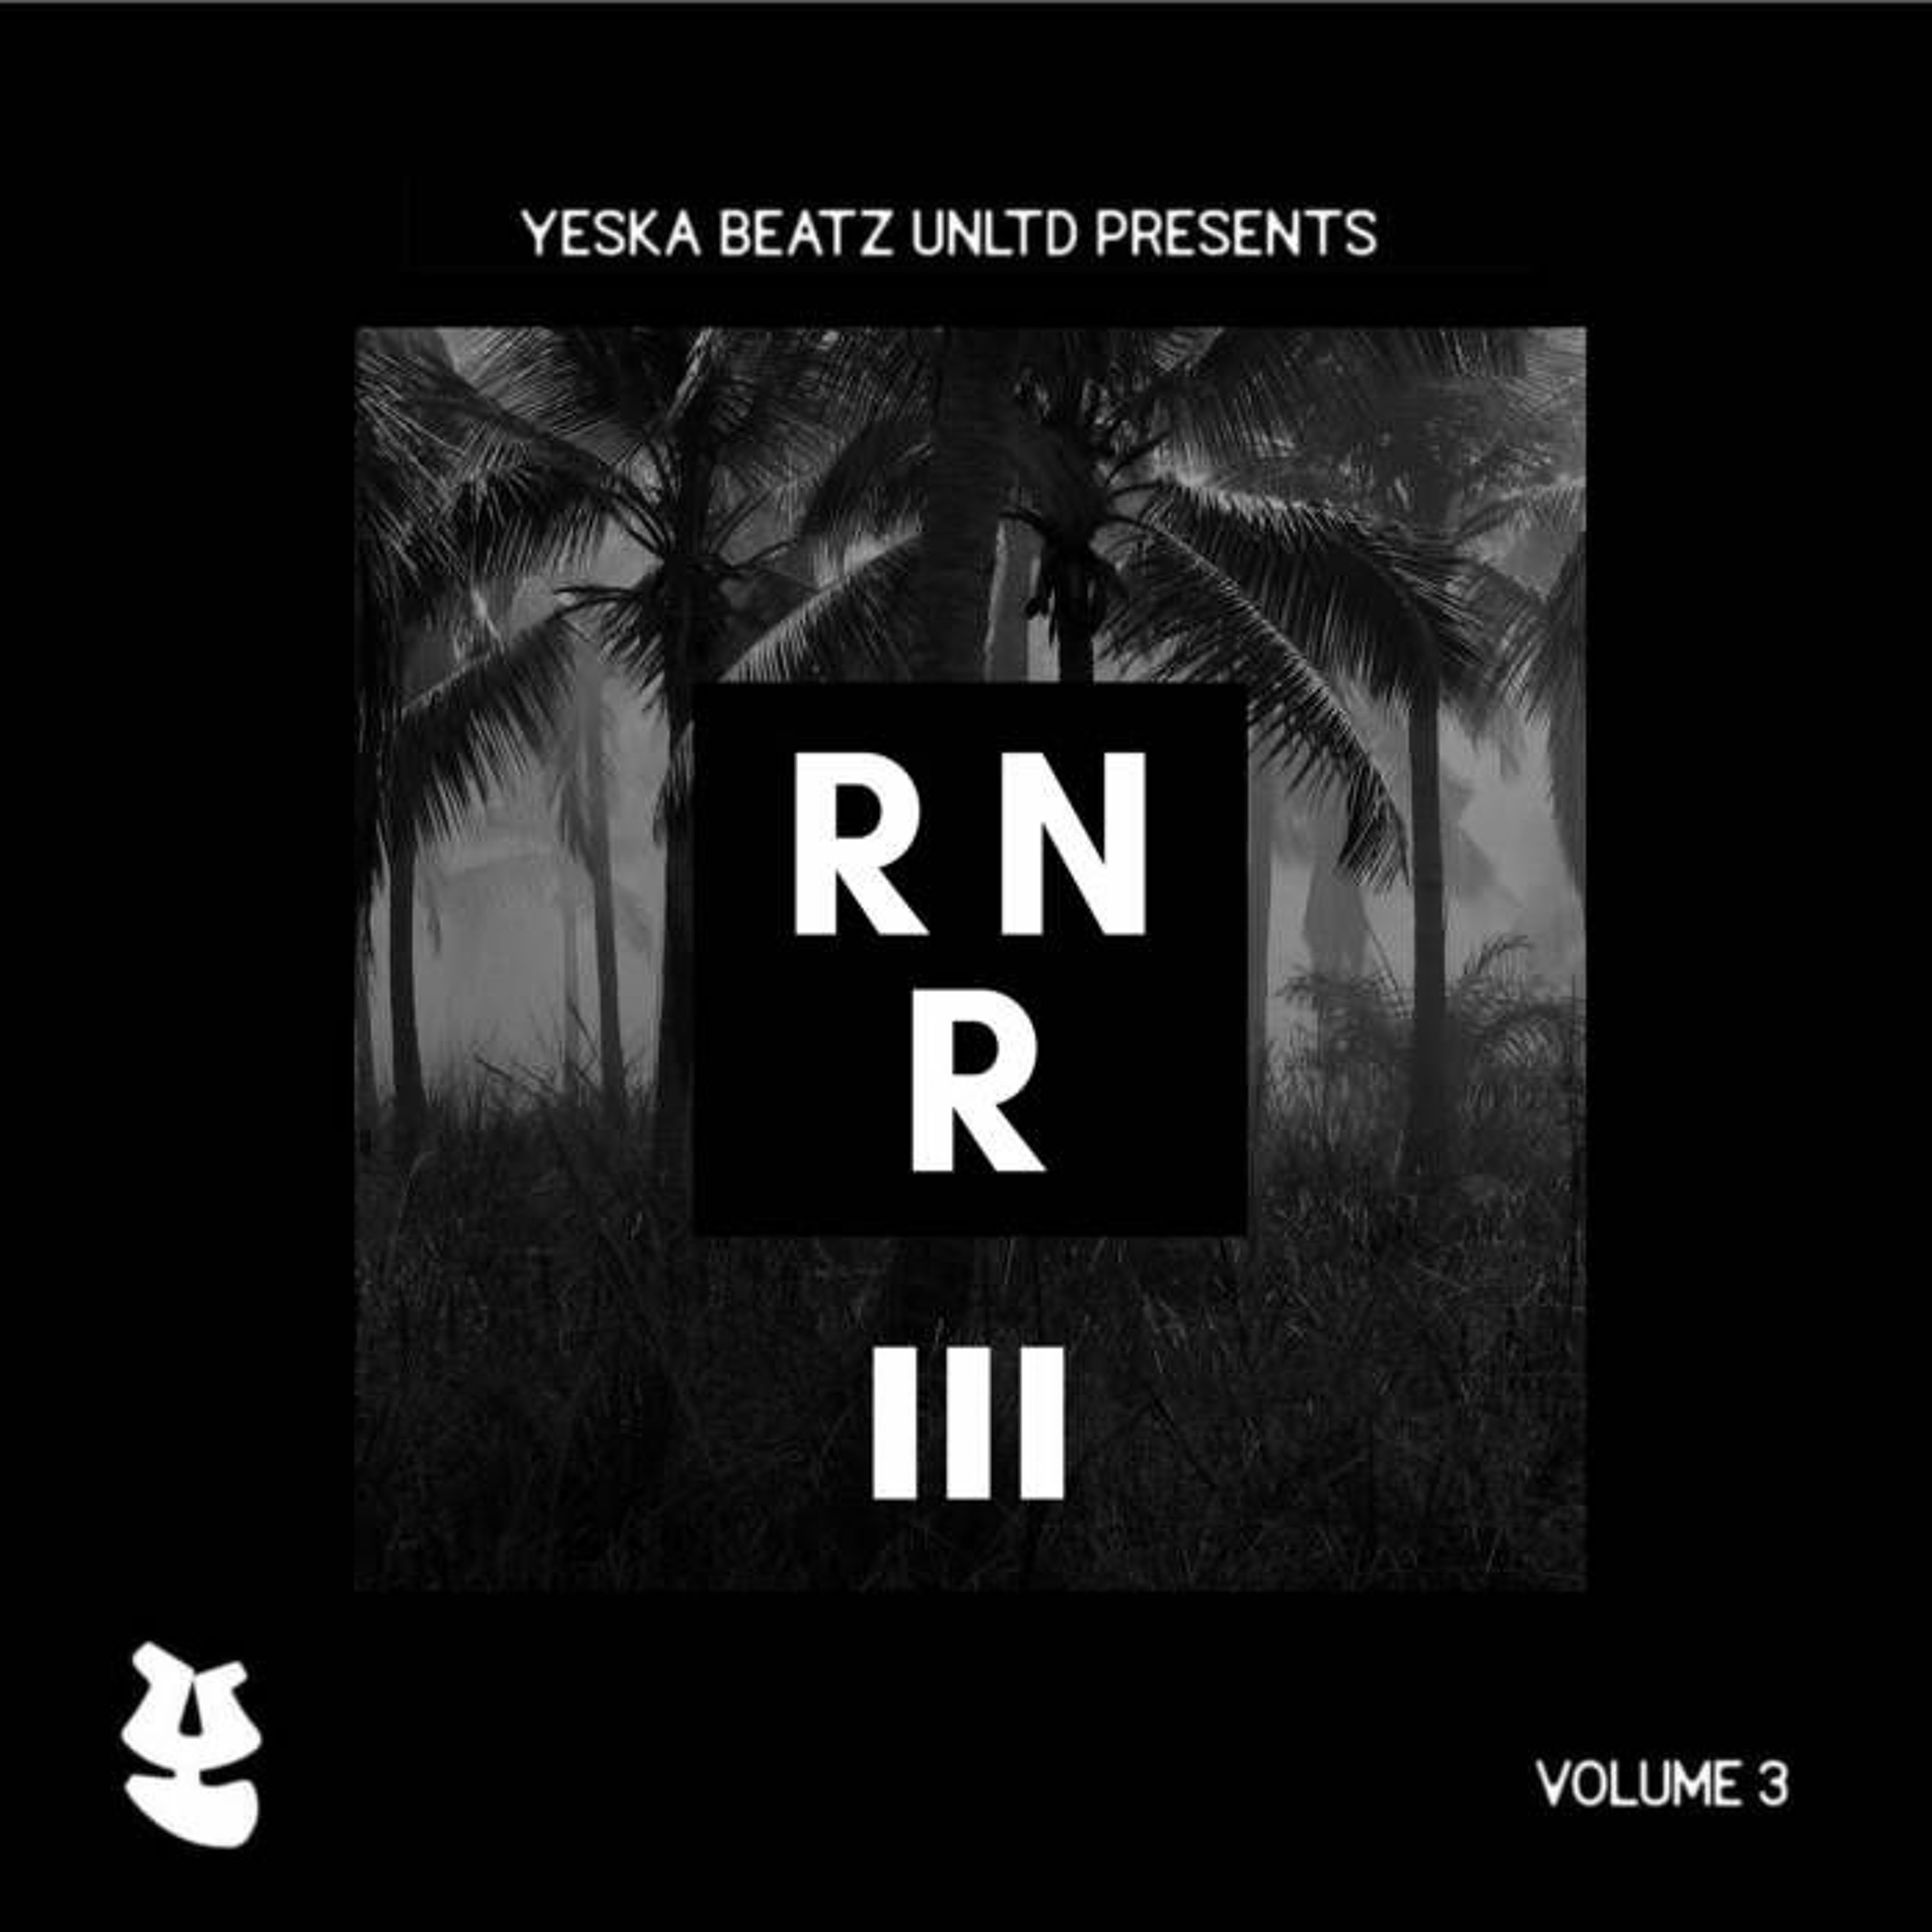 Warmth (Clip) - Out now on ”Ruff N Rugged, Vol 3” (Yeska Beatz)